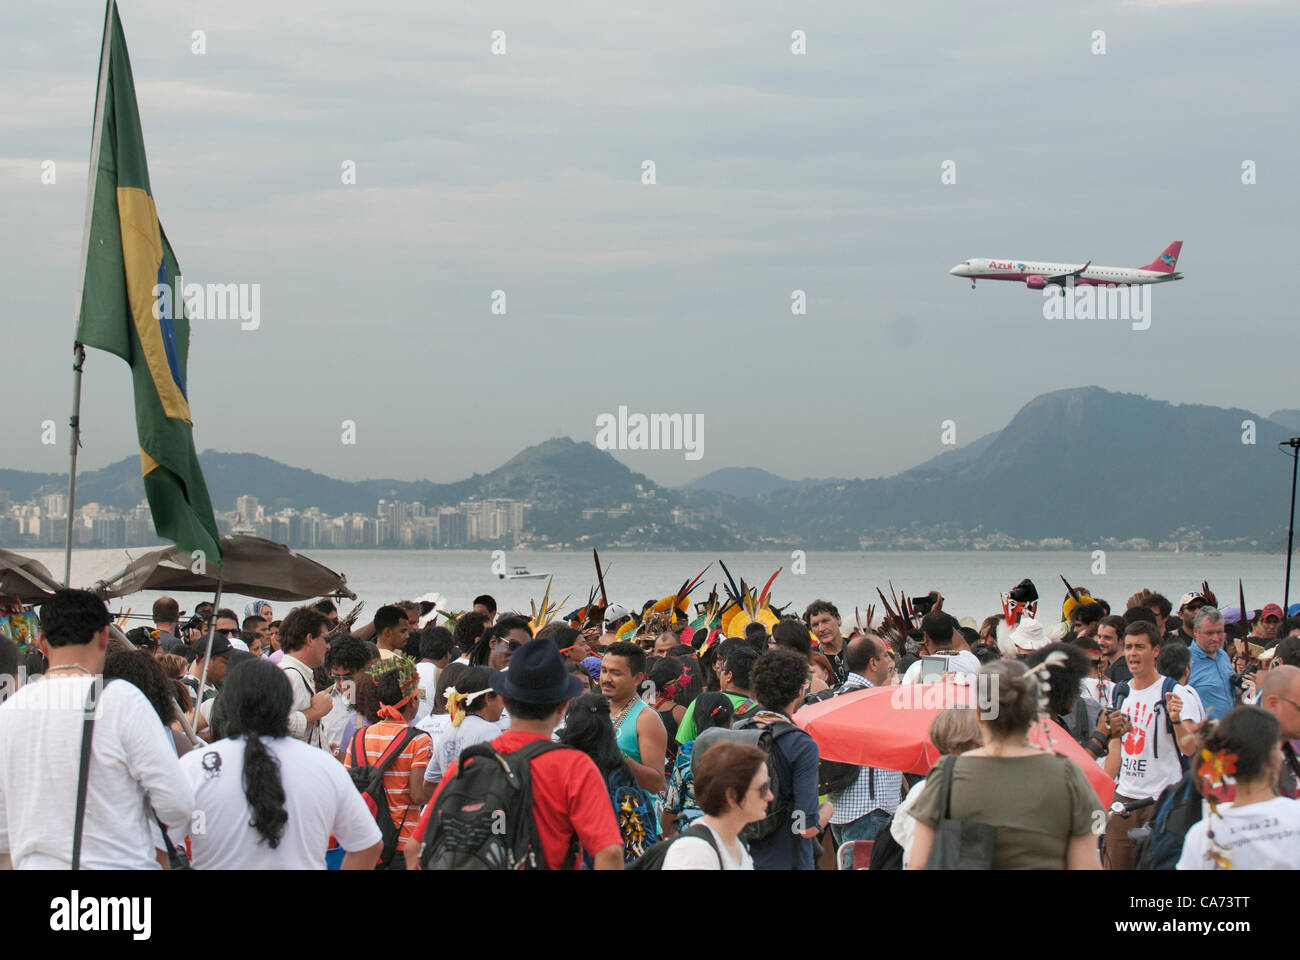 Indigenous people and others are gathering on Flamengo beach for the Human Banner event to protest about the construction of hydroelectric dams on Brazil's rivers while a jet aircraft flies over. The People's Summit at the United Nations Conference on Sustainable Development (Rio+20), Rio de Janeiro, Brazil, 19th June 2012. Photo © Sue Cunningham. Stock Photo